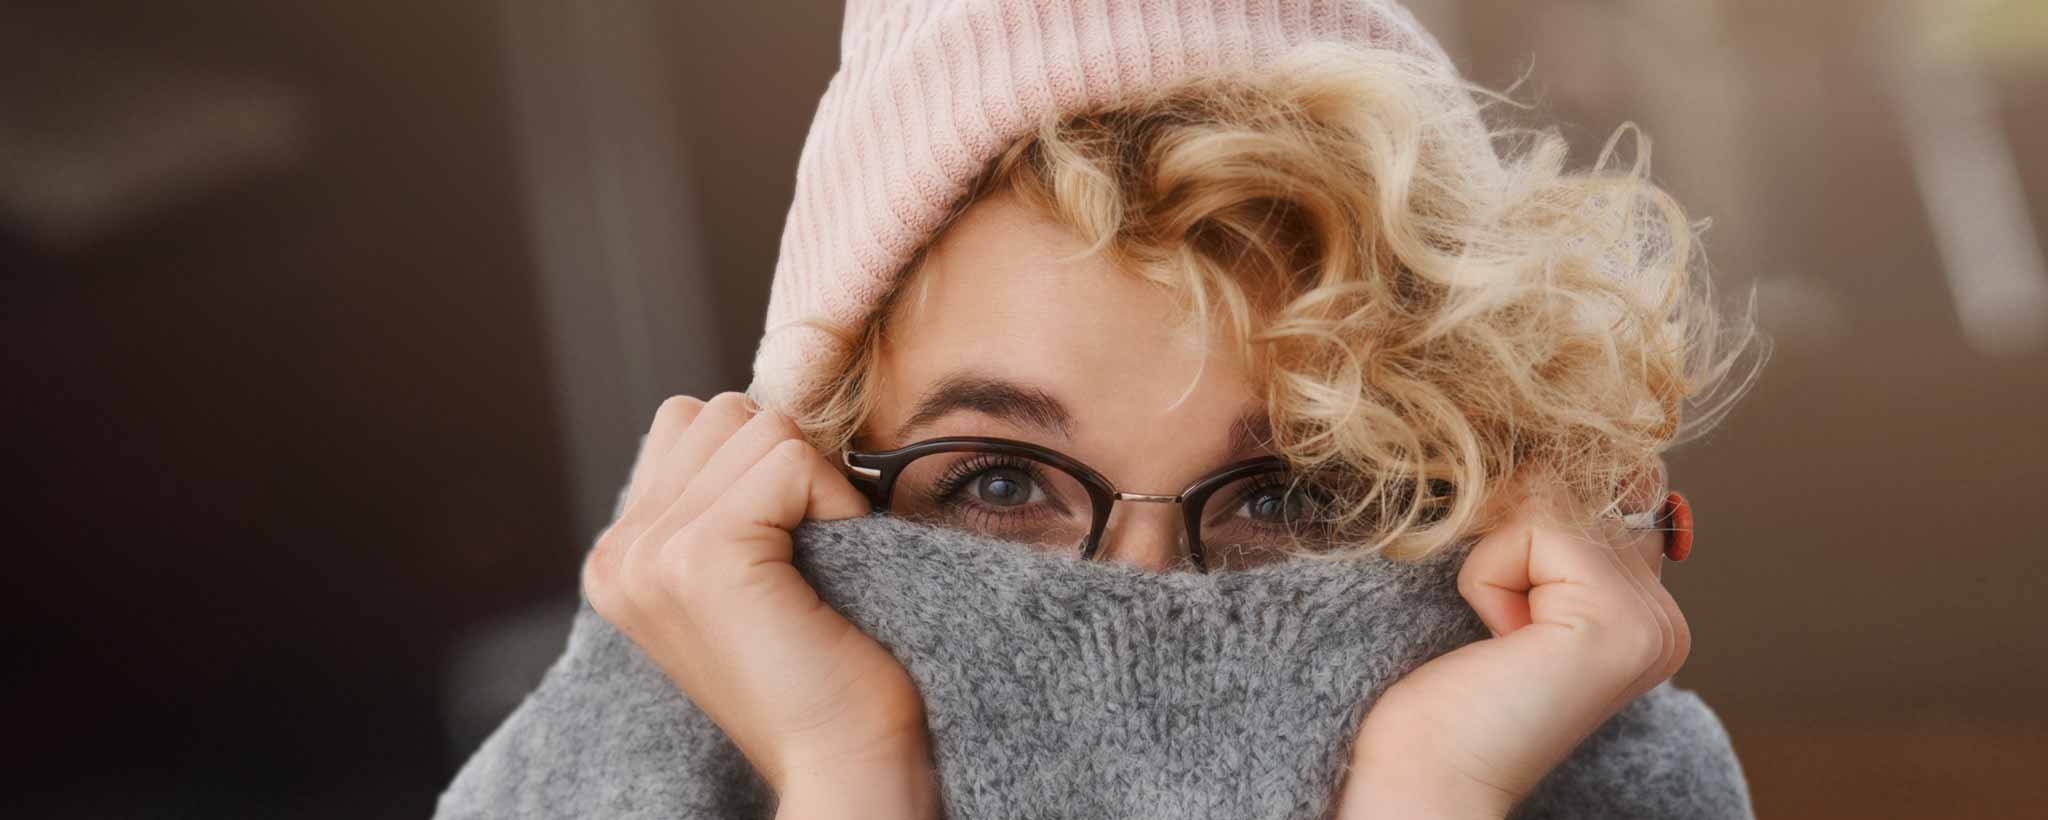 'Woman hiding behind sweater'